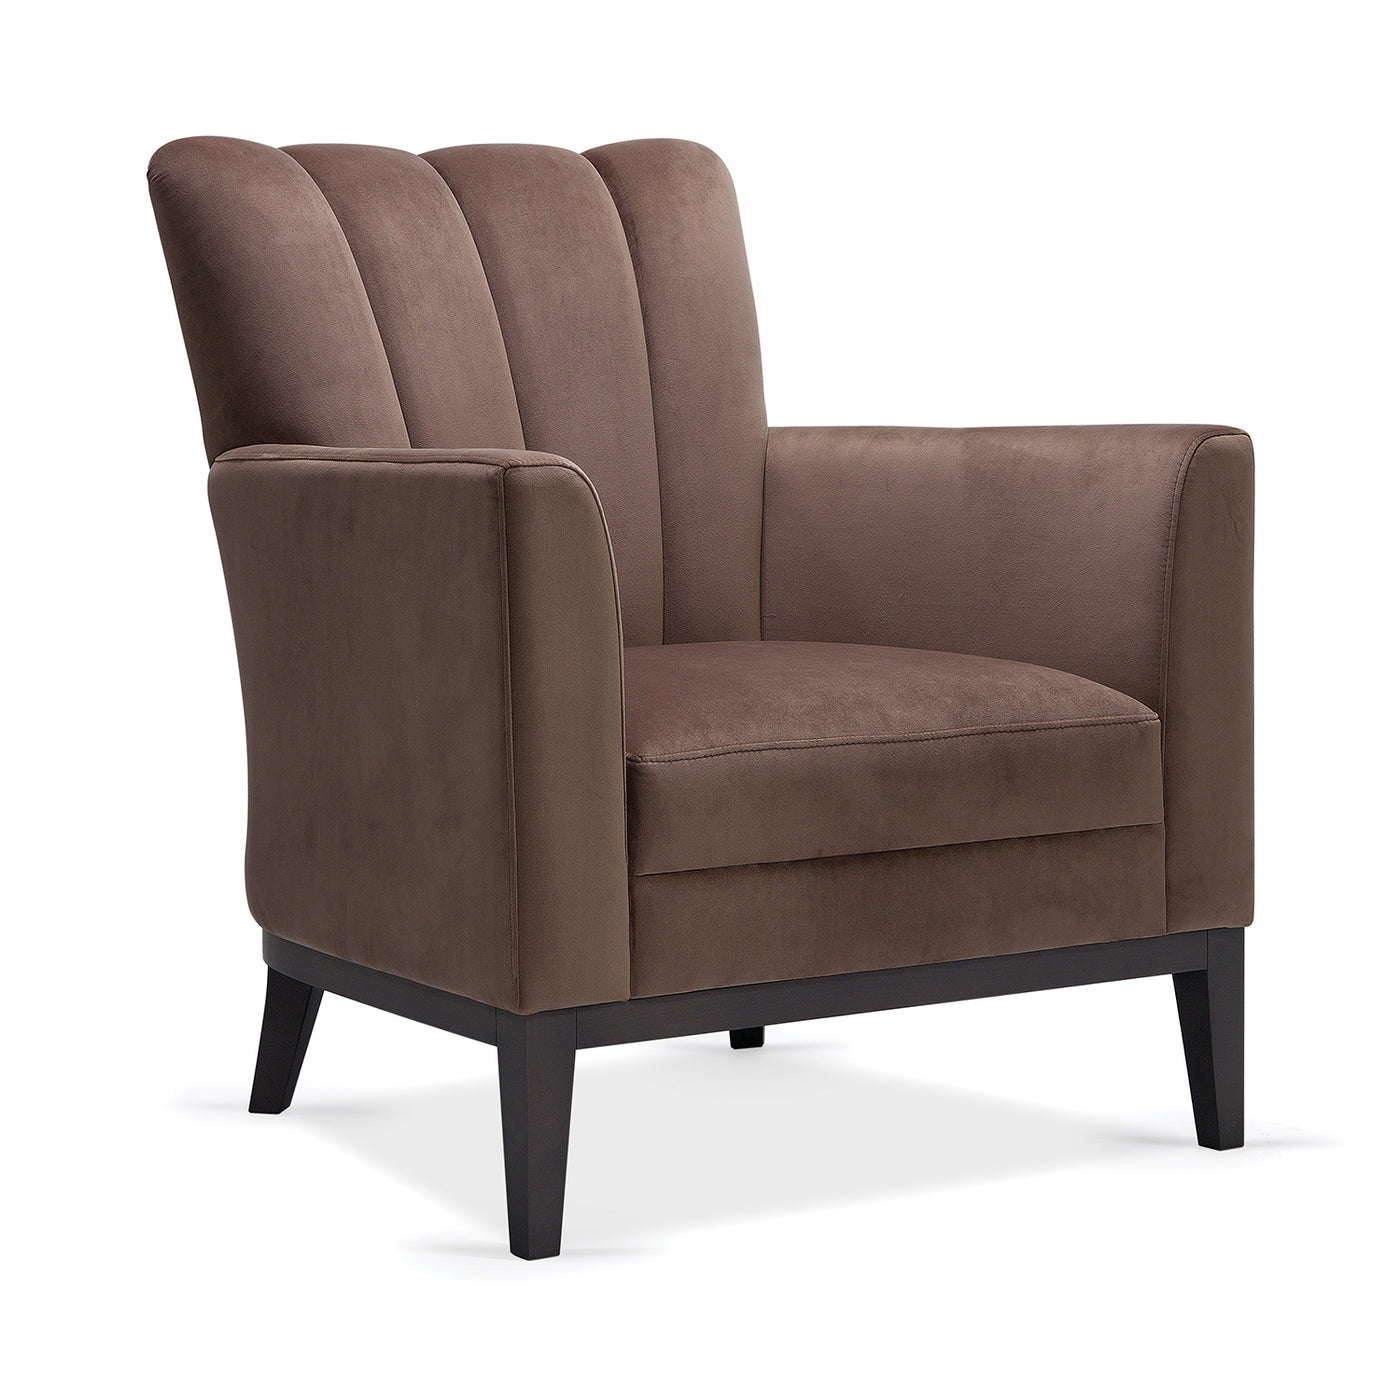 Barkly Lounge Chair